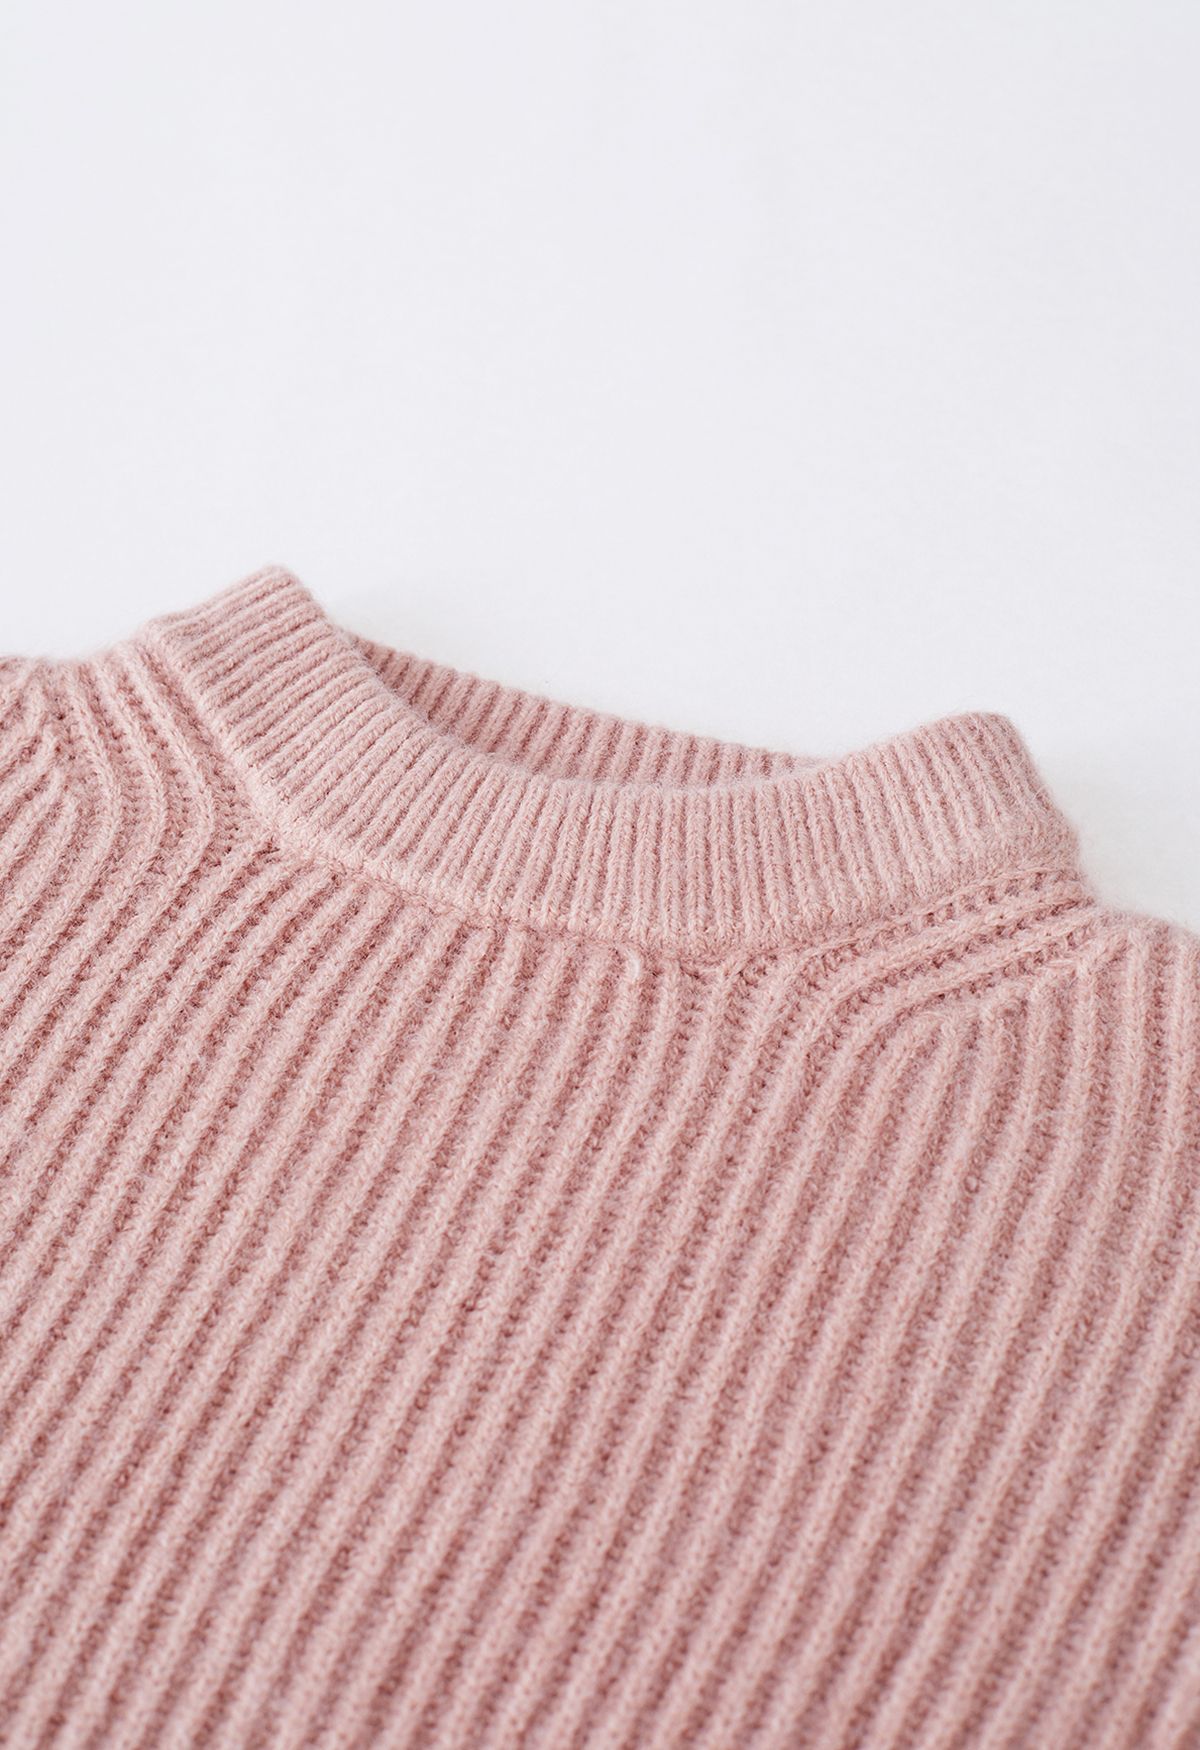 Solid Color Rib Knit Sweater in Dusty Pink